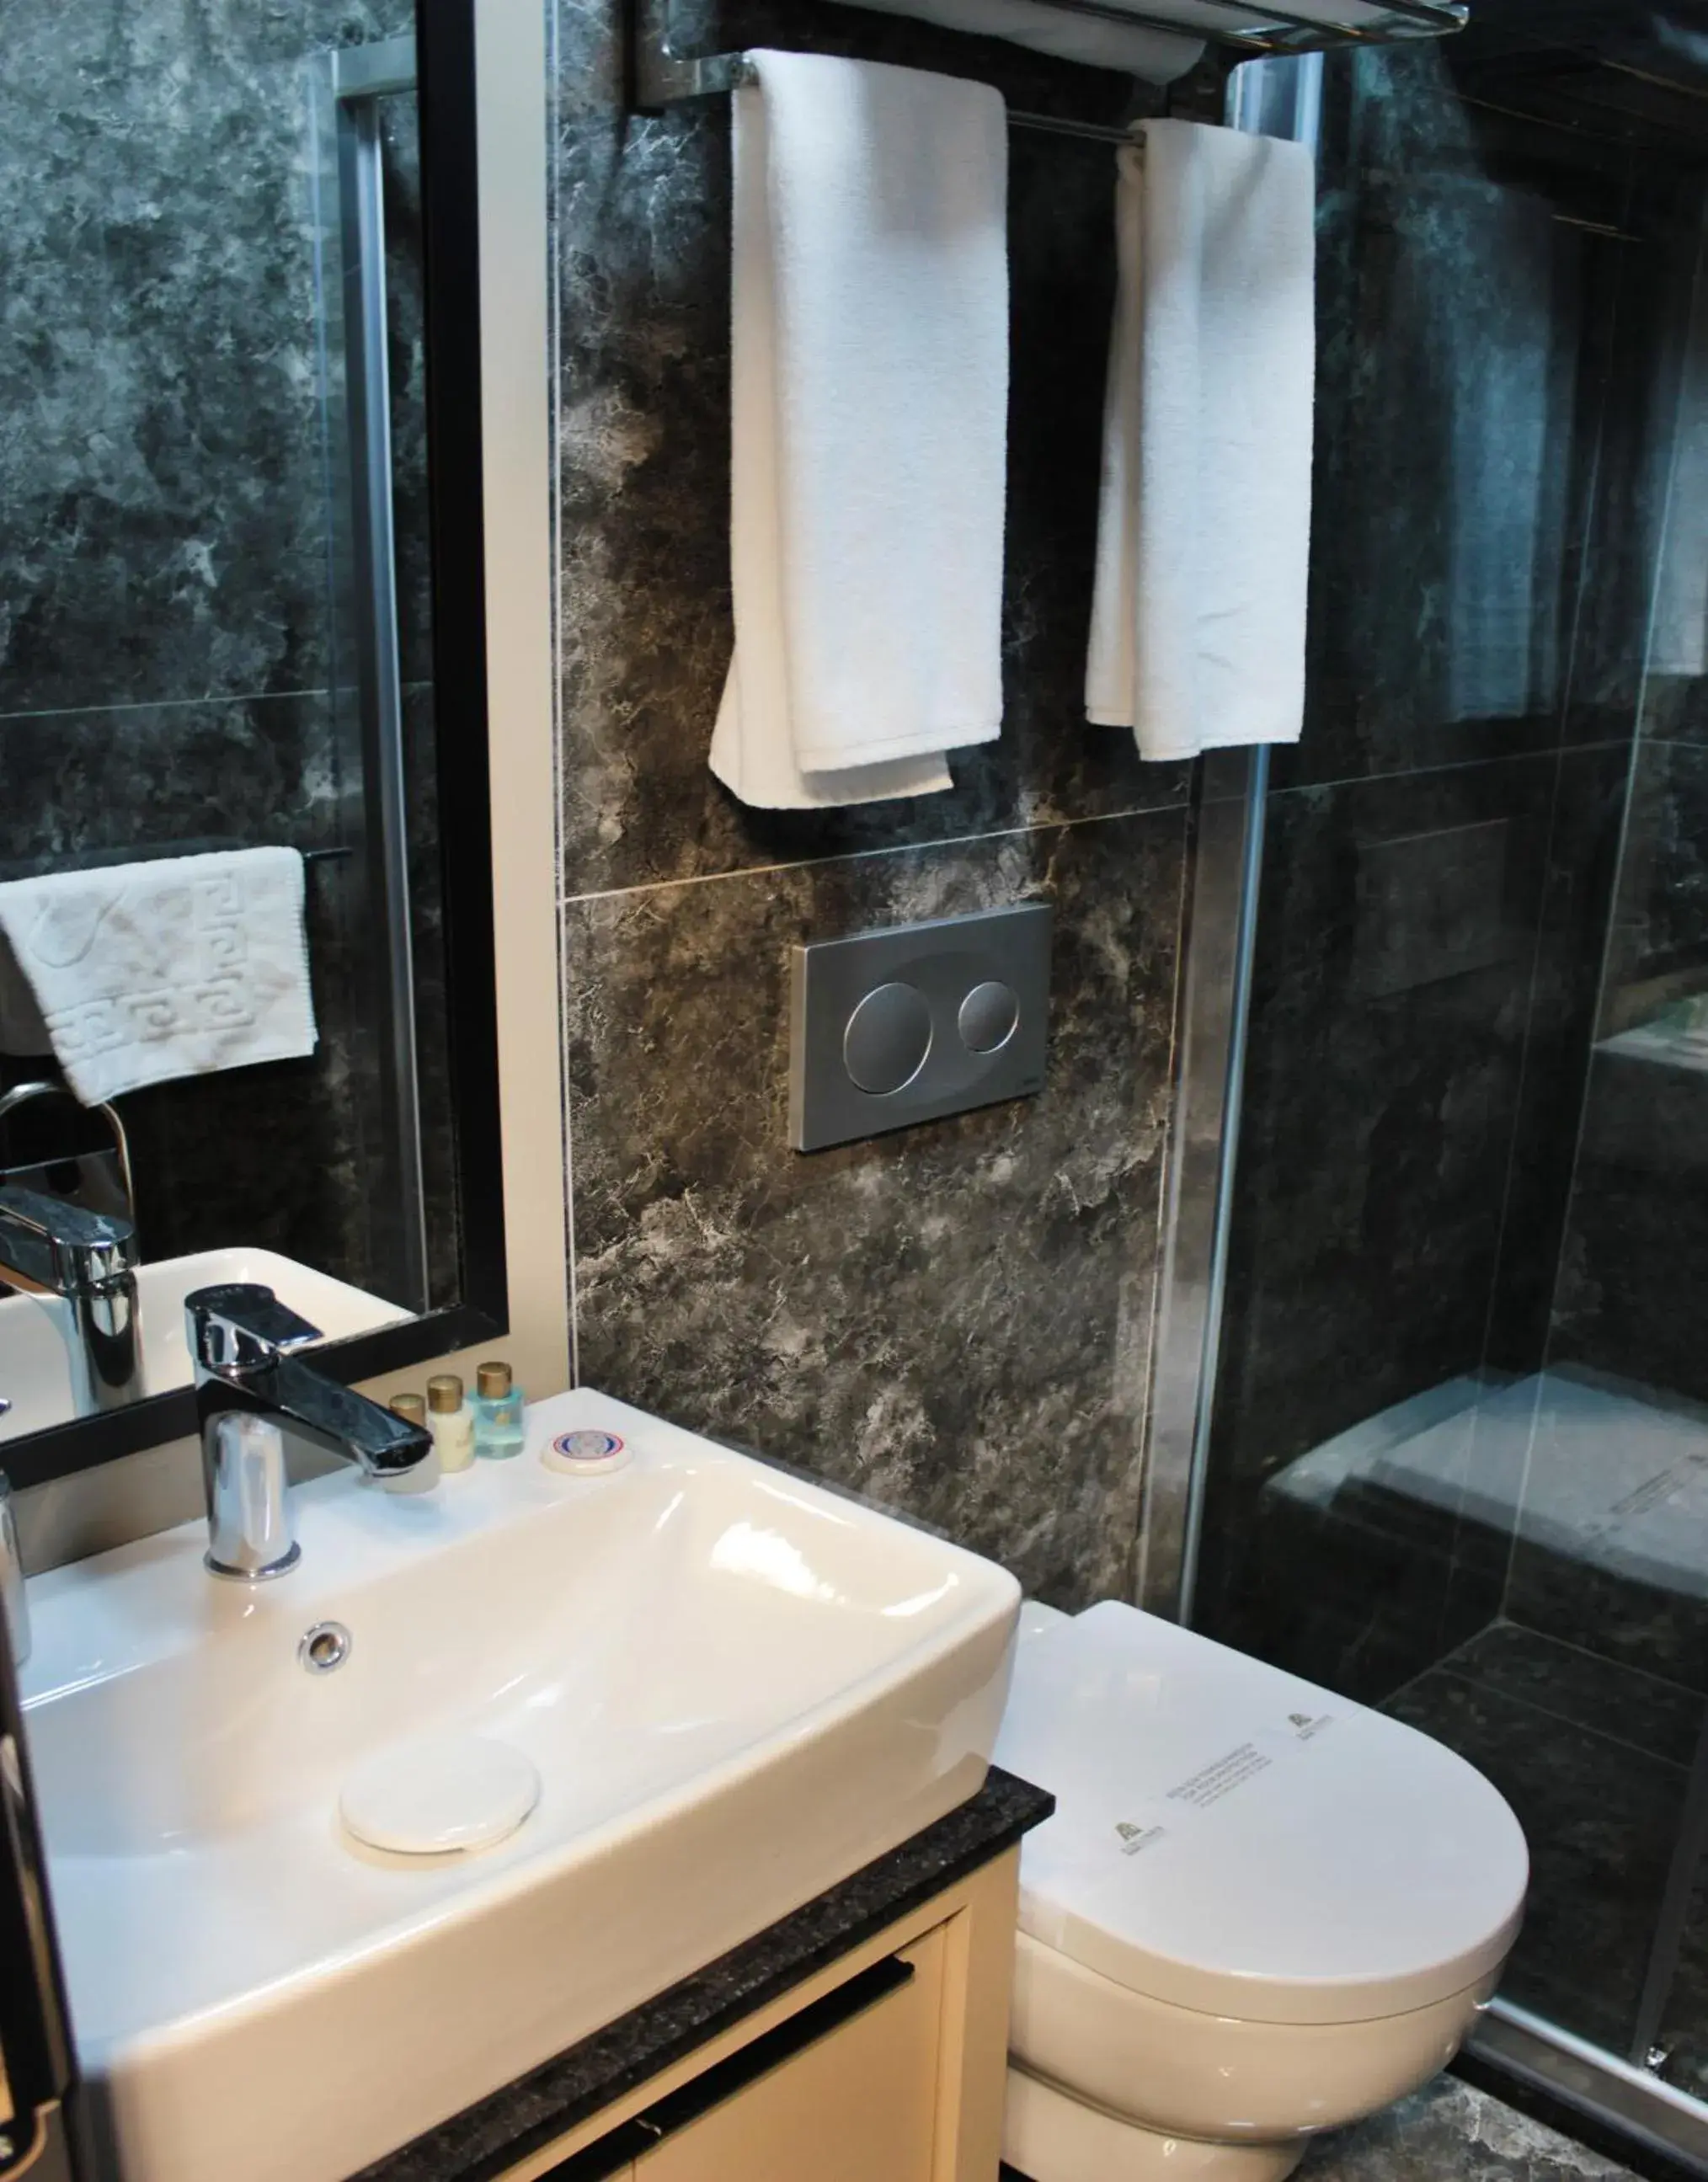 Bathroom in FRT AİRLİNES OTEL